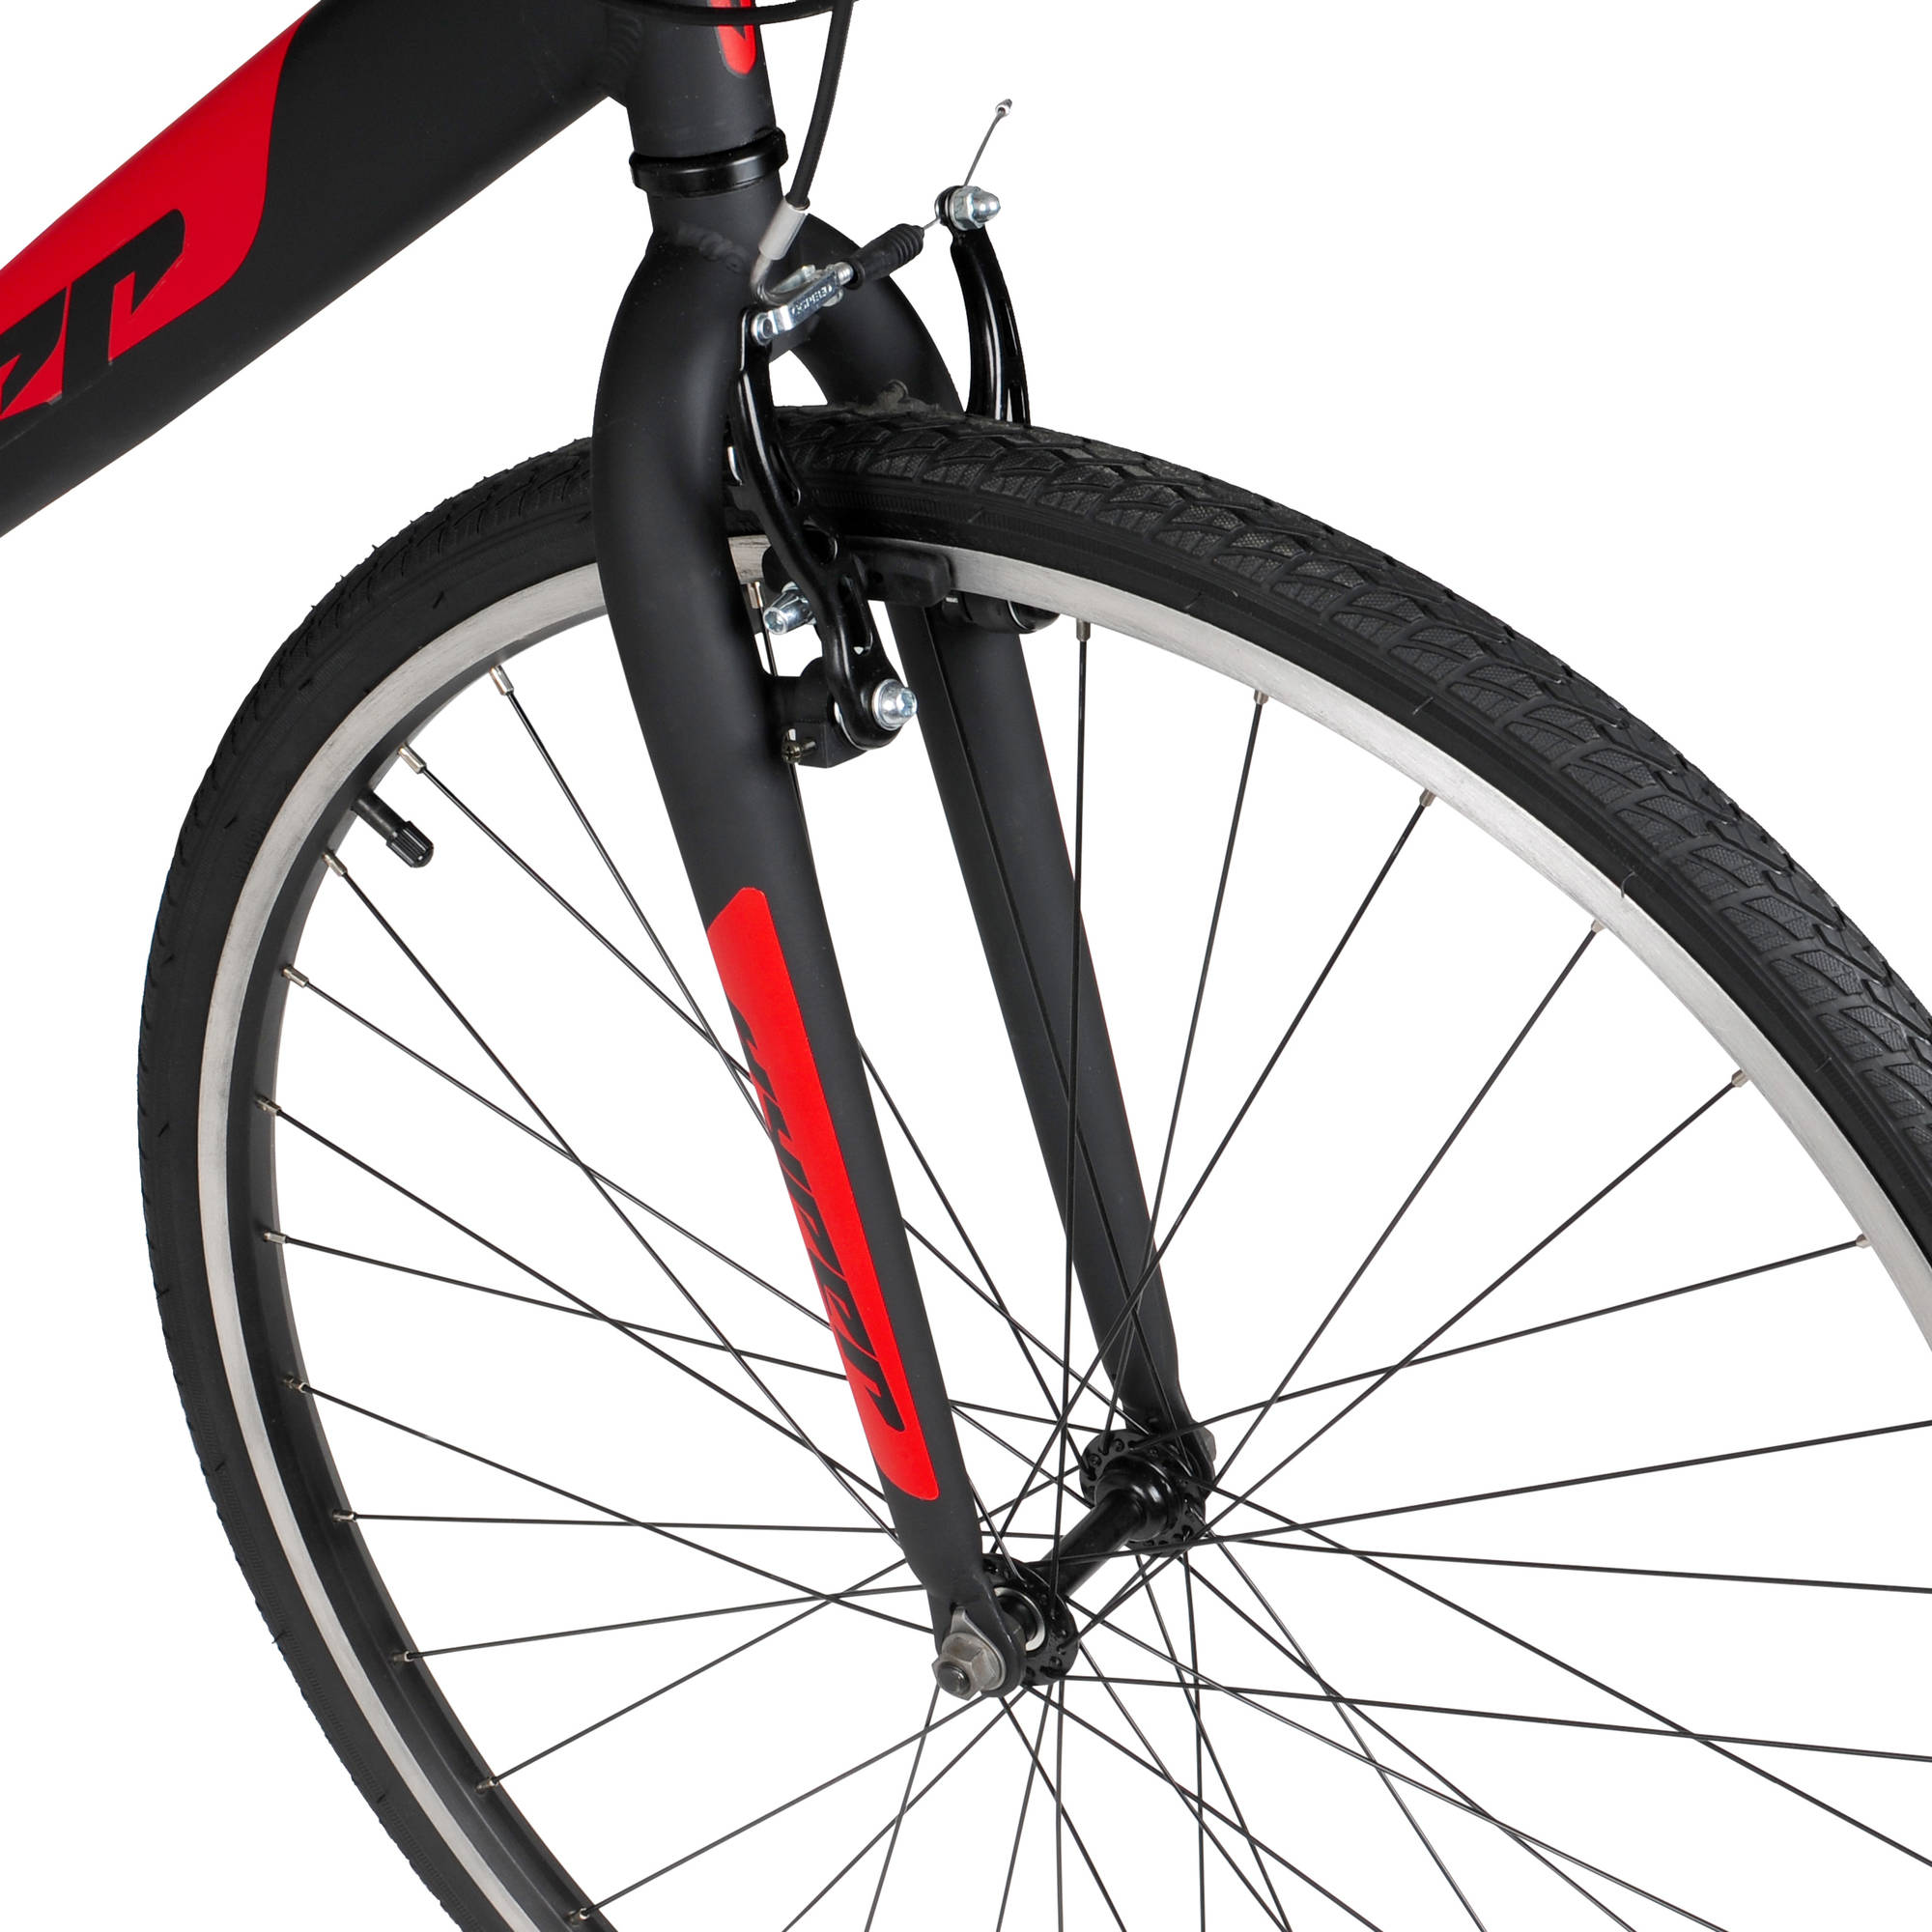 Hyper Bicycle 700c Men's Spin Fit Hybrid Bike, Black and Red - image 3 of 7